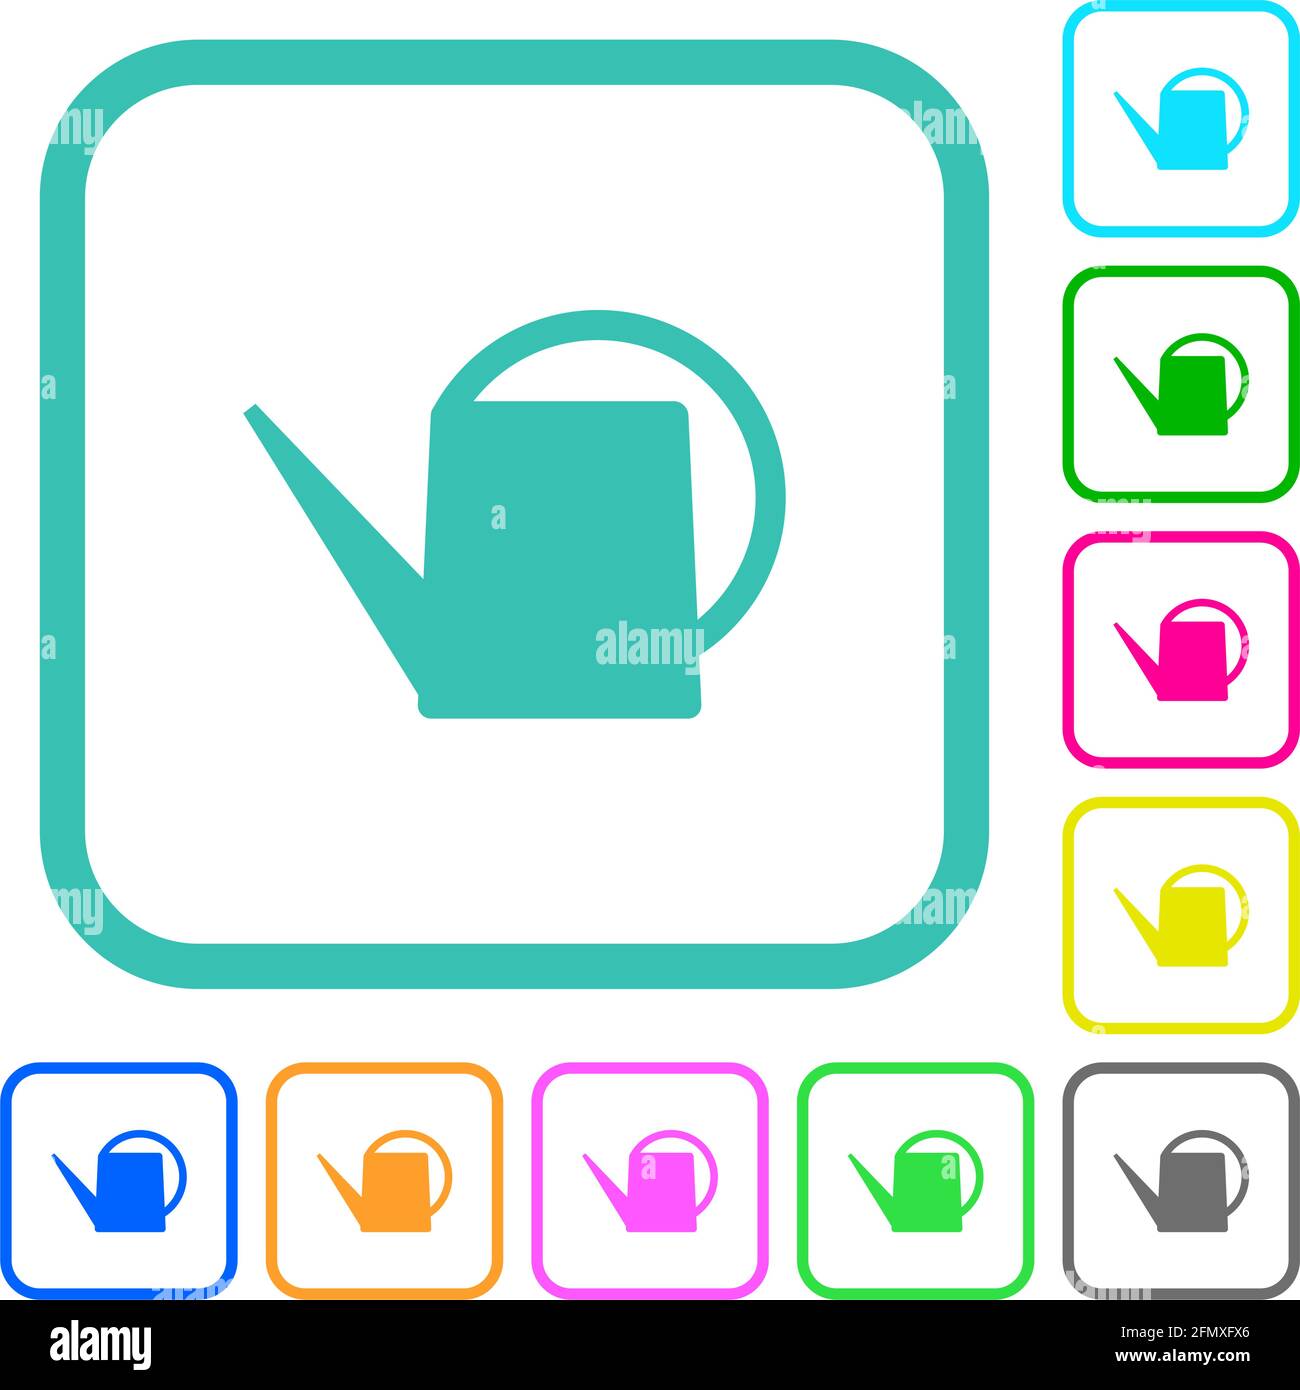 Watering can vivid colored flat icons in curved borders on white background Stock Vector